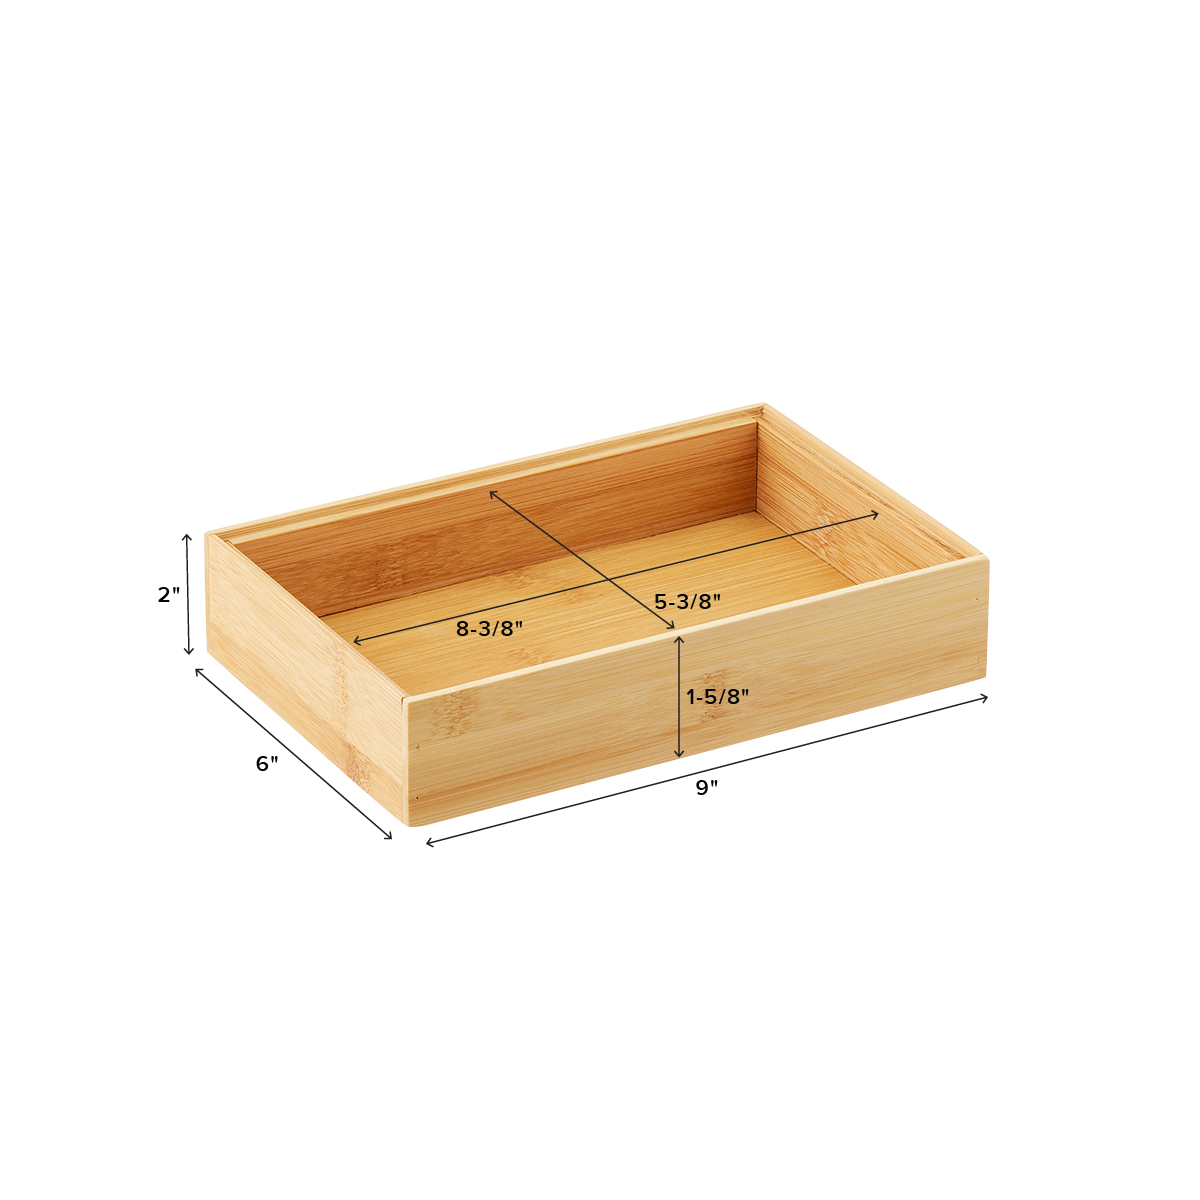 Bamboo Kitchen Cabinet Drawer Organiser Stack-able Tray Bins 